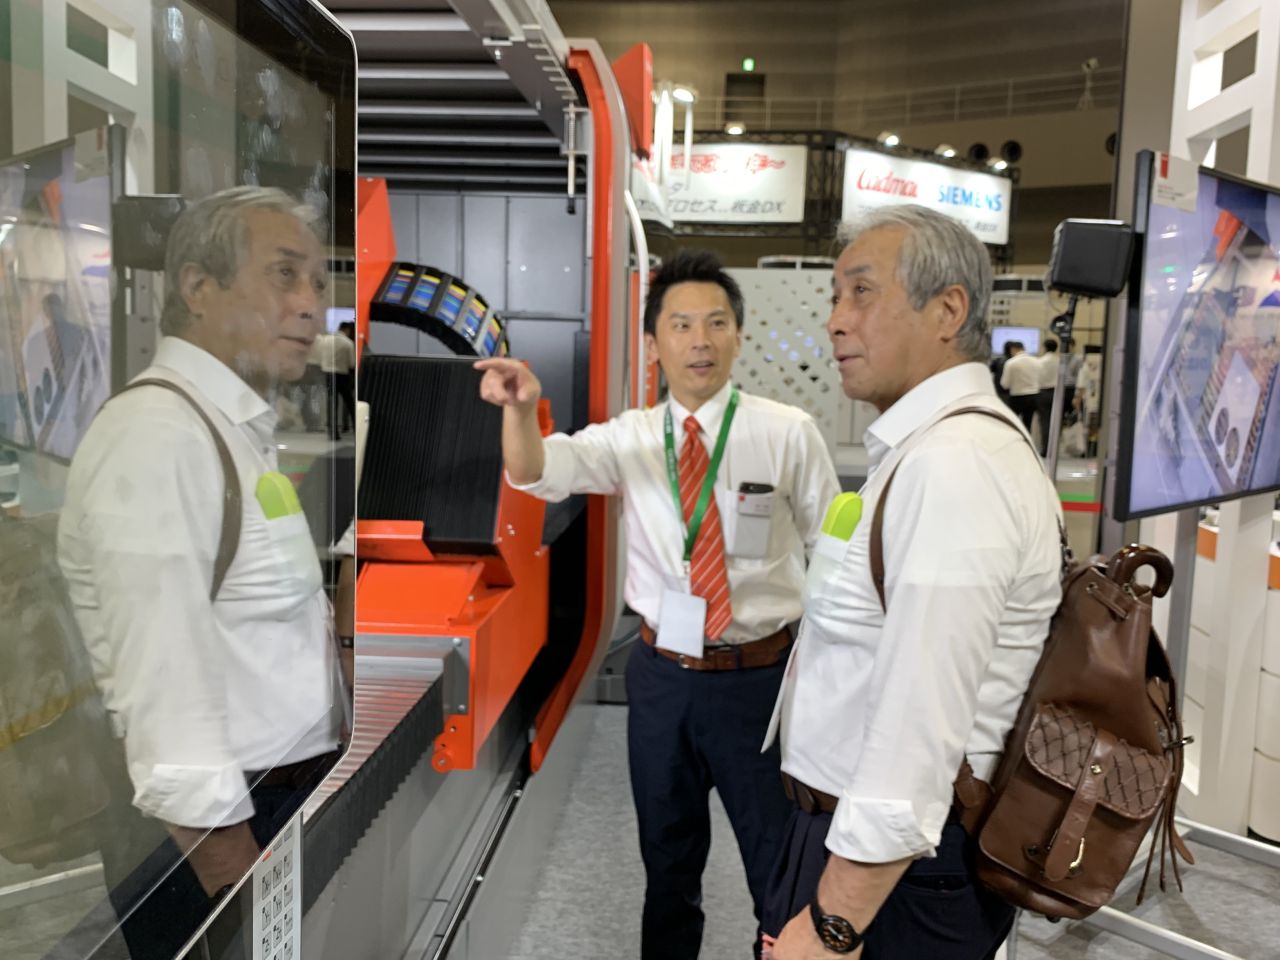 Bystronic salesman explains something to a trade fair guest